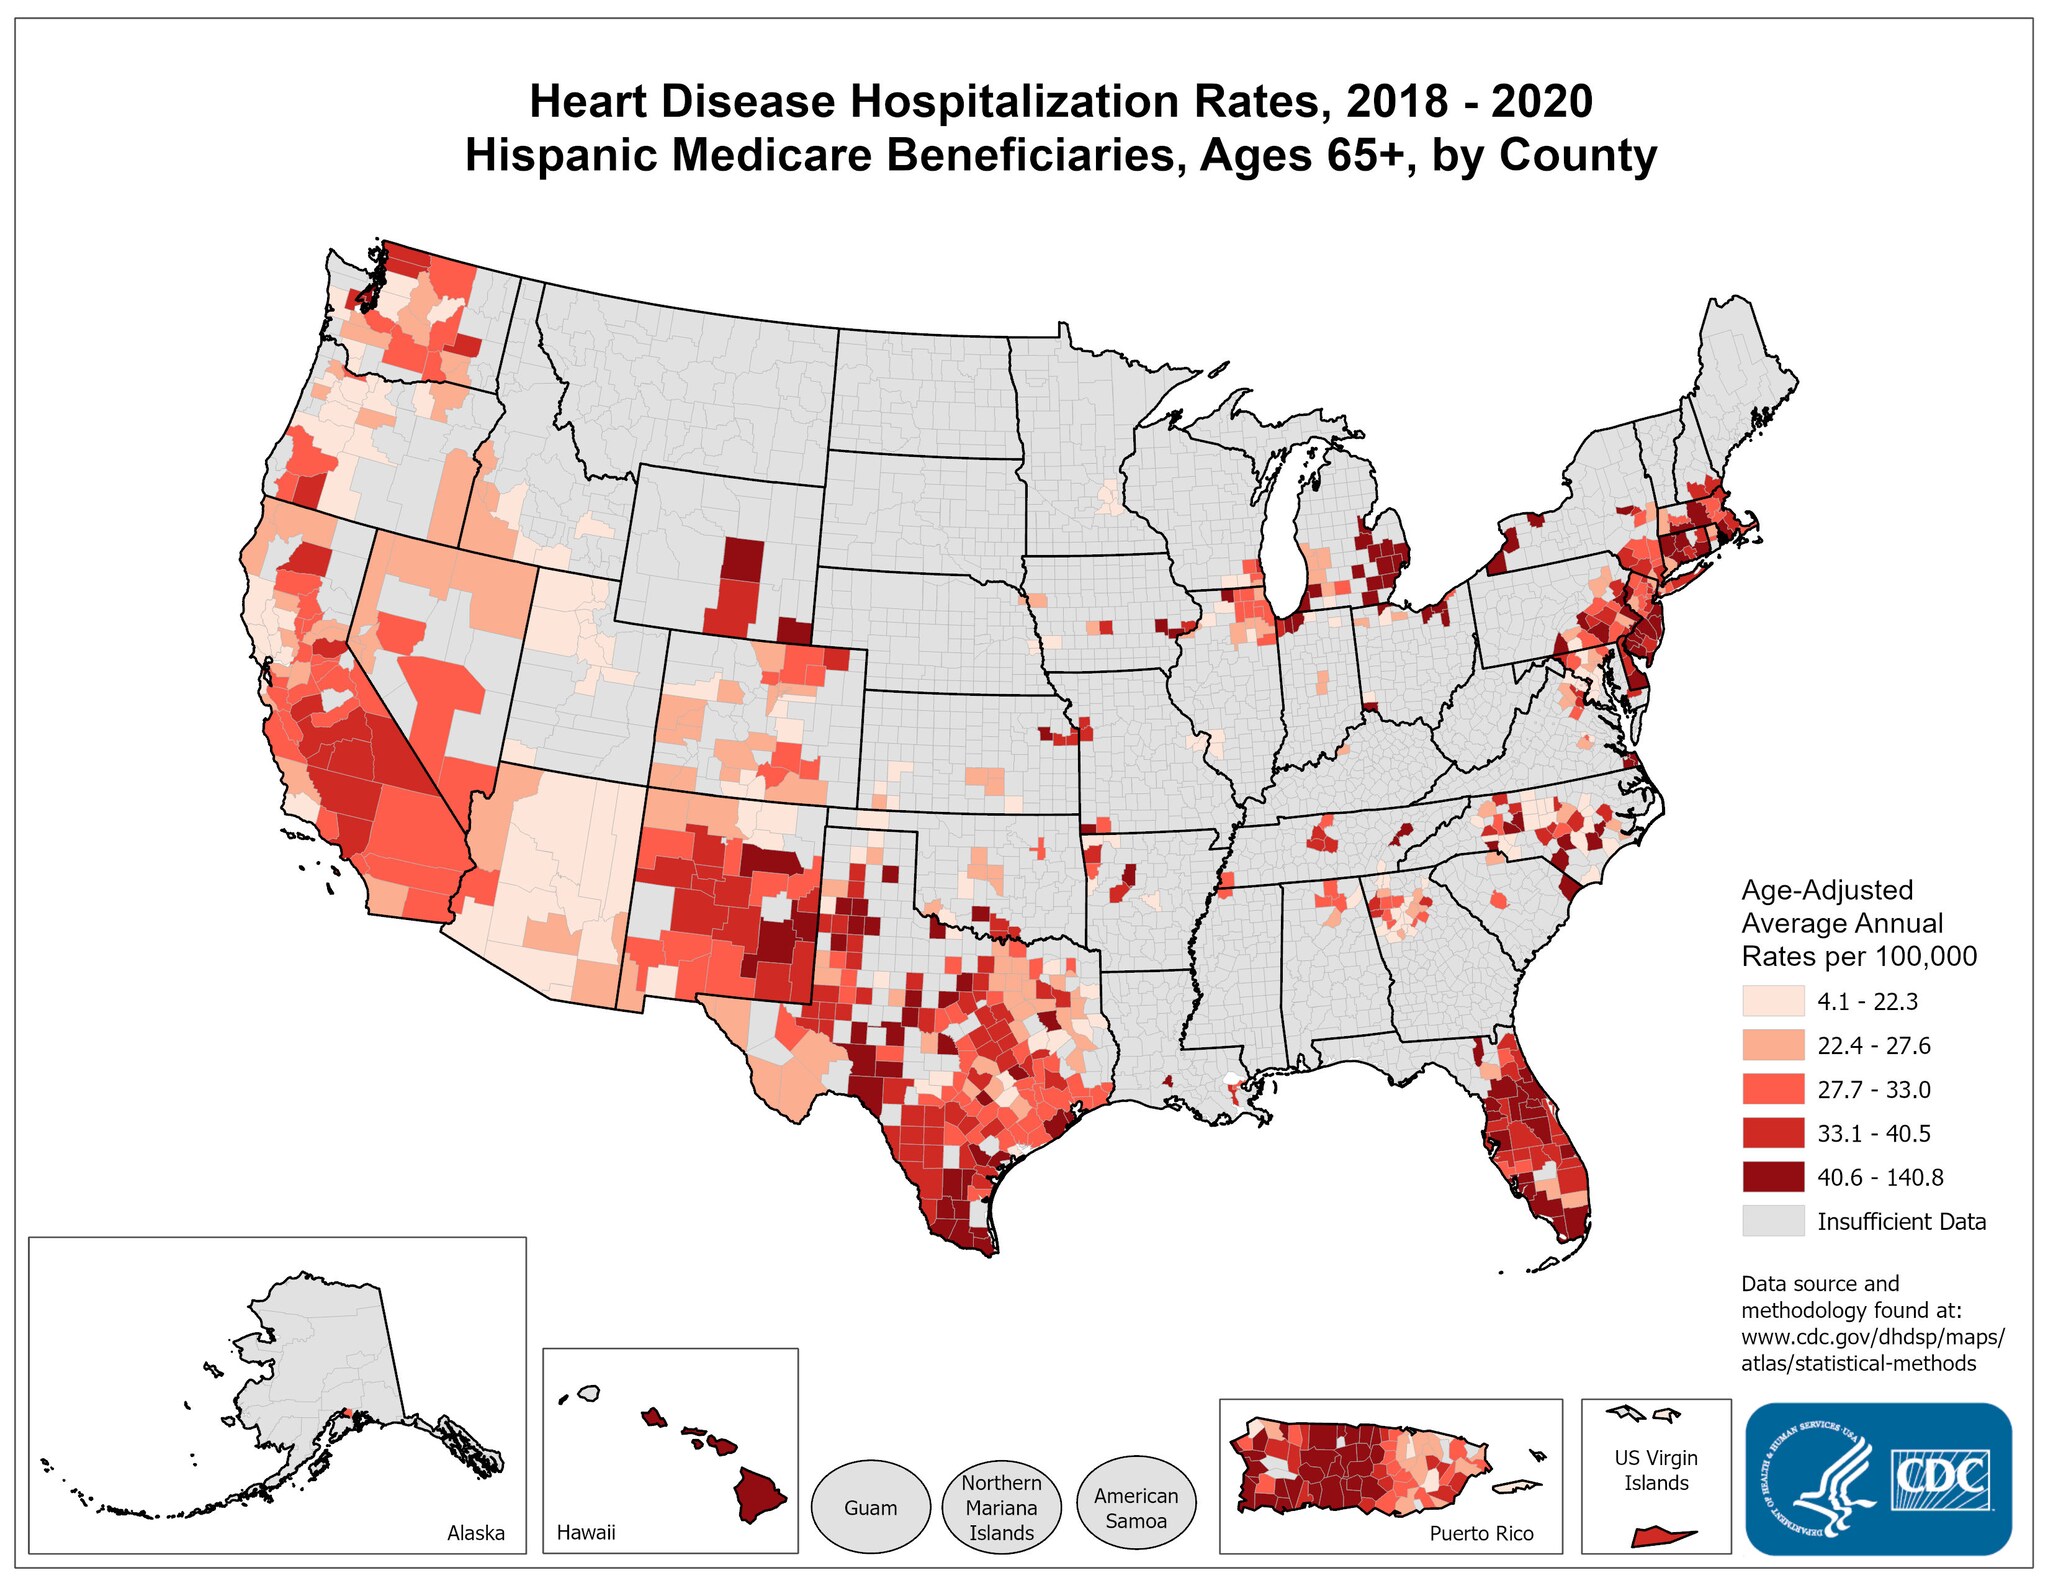 Heart Disease Hospitalization Rates for 2015 through 2017 for Hispanics Aged 65 Years and Older by County. The map shows that concentrations of counties with the highest heart disease hospitalization rates - meaning the top quintile - are located primarily in parts of Texas, Florida, Massachusetts, New Jersey, Pennsylvania, and Connecticut. With pockets of high rates located in Michigan, New York, and Arizona.